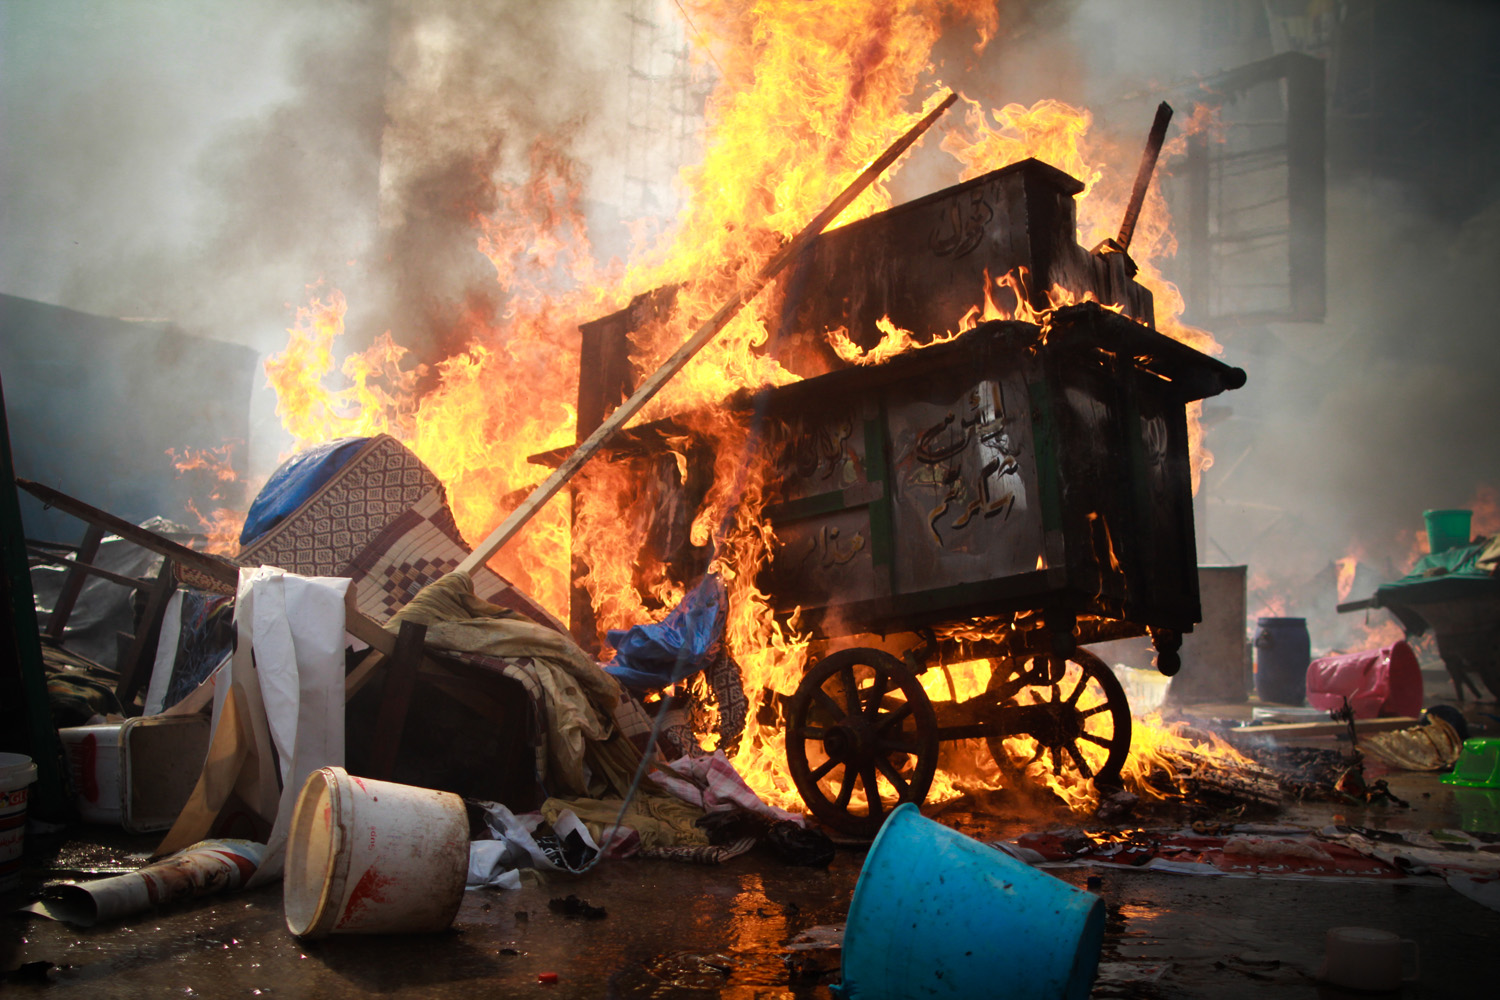 Aug. 14, 2013. A potato wheel-cart burns, along with tents and Morsi supporters' belongings as security forces violently dispersed the 40-day long Rabaa Adaweya sit-in.